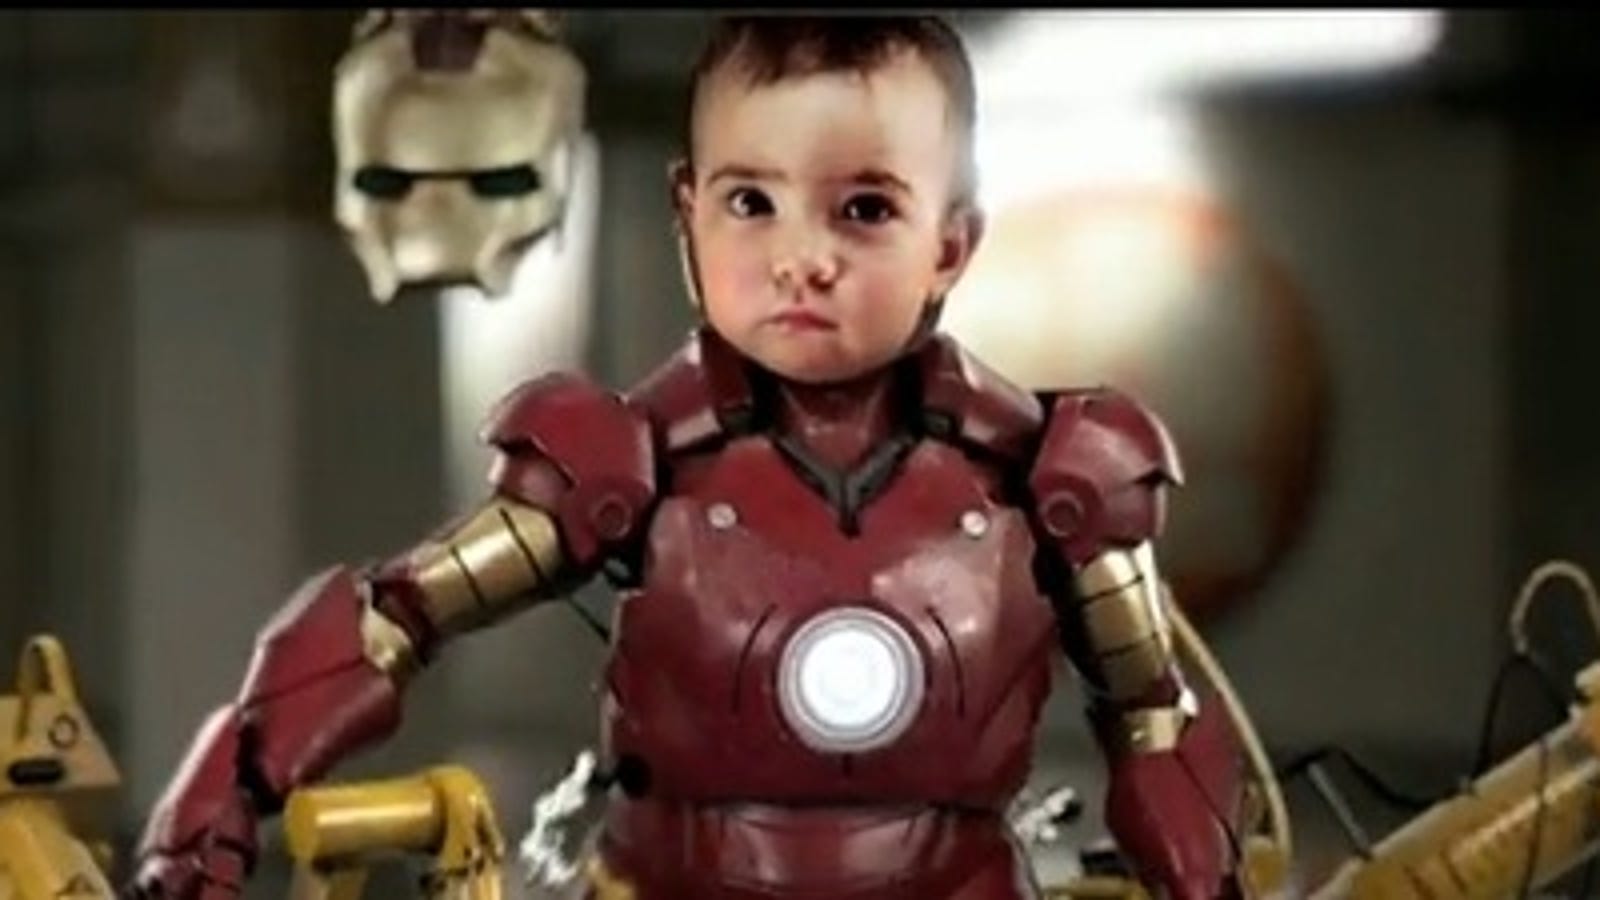 Iron Baby Saves the World with Cuteness